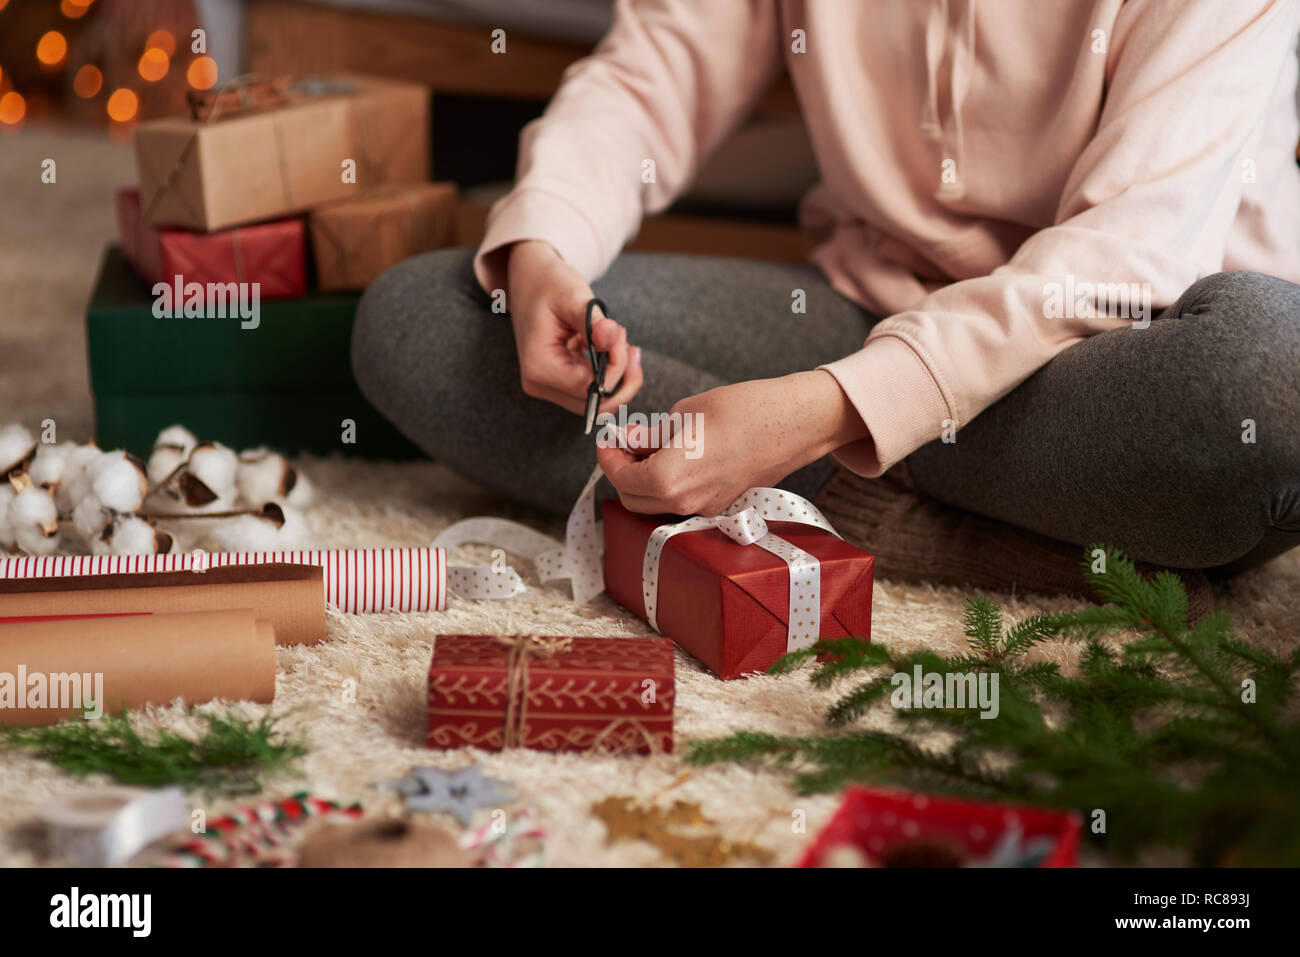 Woman wrapping Christmas presents Banque D'Images